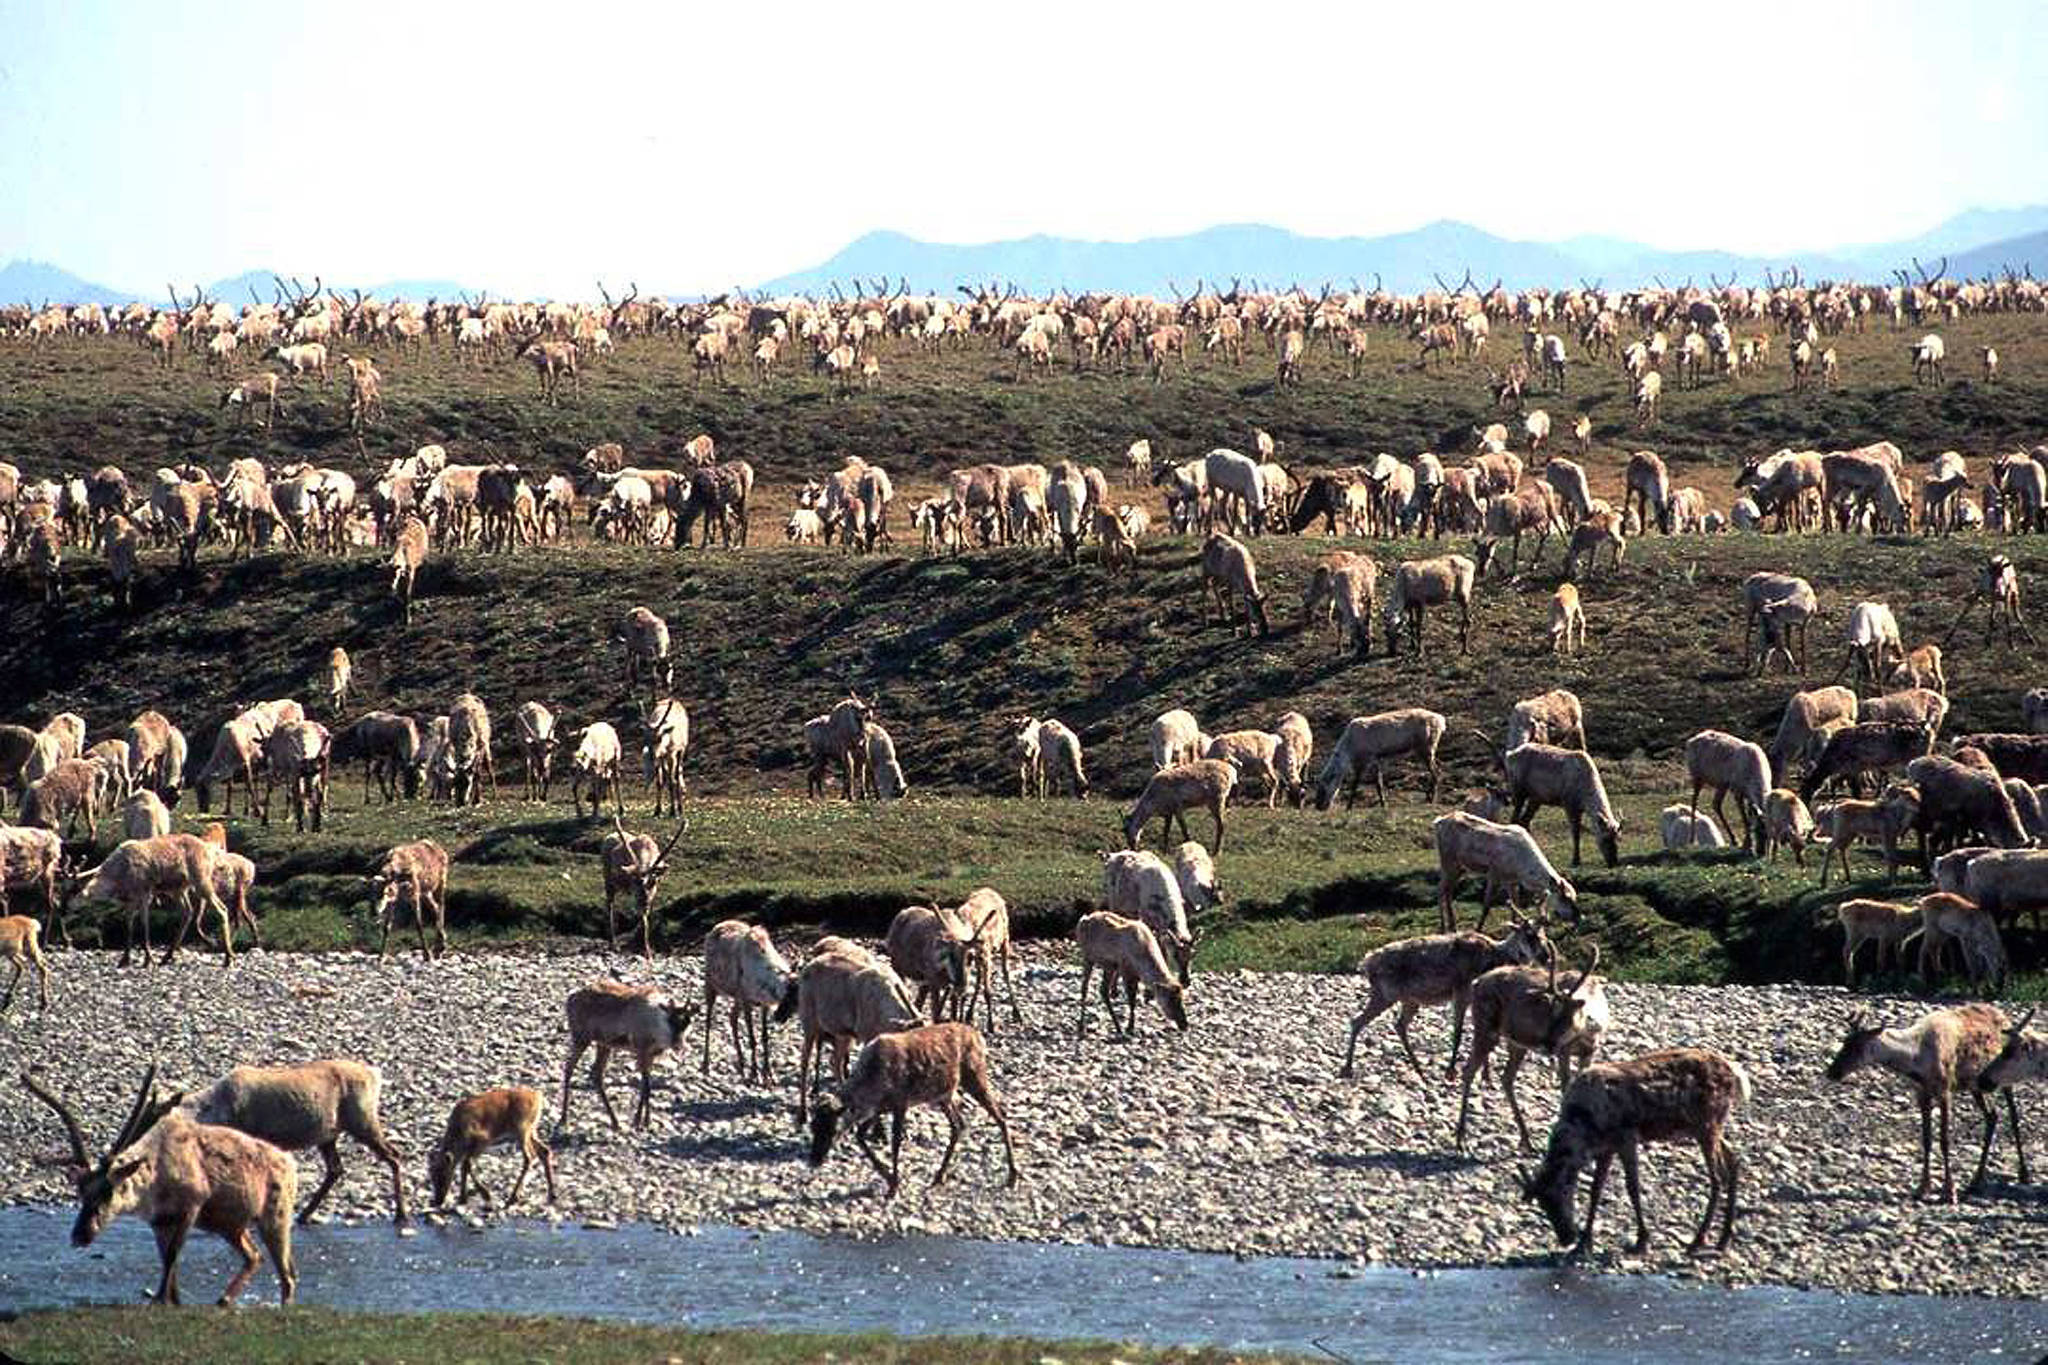 In this undated file photo provided by the U.S. Fish and Wildlife Service, caribou from the Porcupine caribou herd migrate onto the coastal plain of the Arctic National Wildlife Refuge in northeast Alaska. The U.S. government held its first-ever oil and gas lease sale Wednesday, Jan. 6, 2021 for Alaska’s Arctic National Wildlife Refuge, an event critics labeled as a bust with major oil companies staying on the sidelines and a state corporation emerging as the main bidder. (U.S. Fish and Wildlife Service via AP, File)